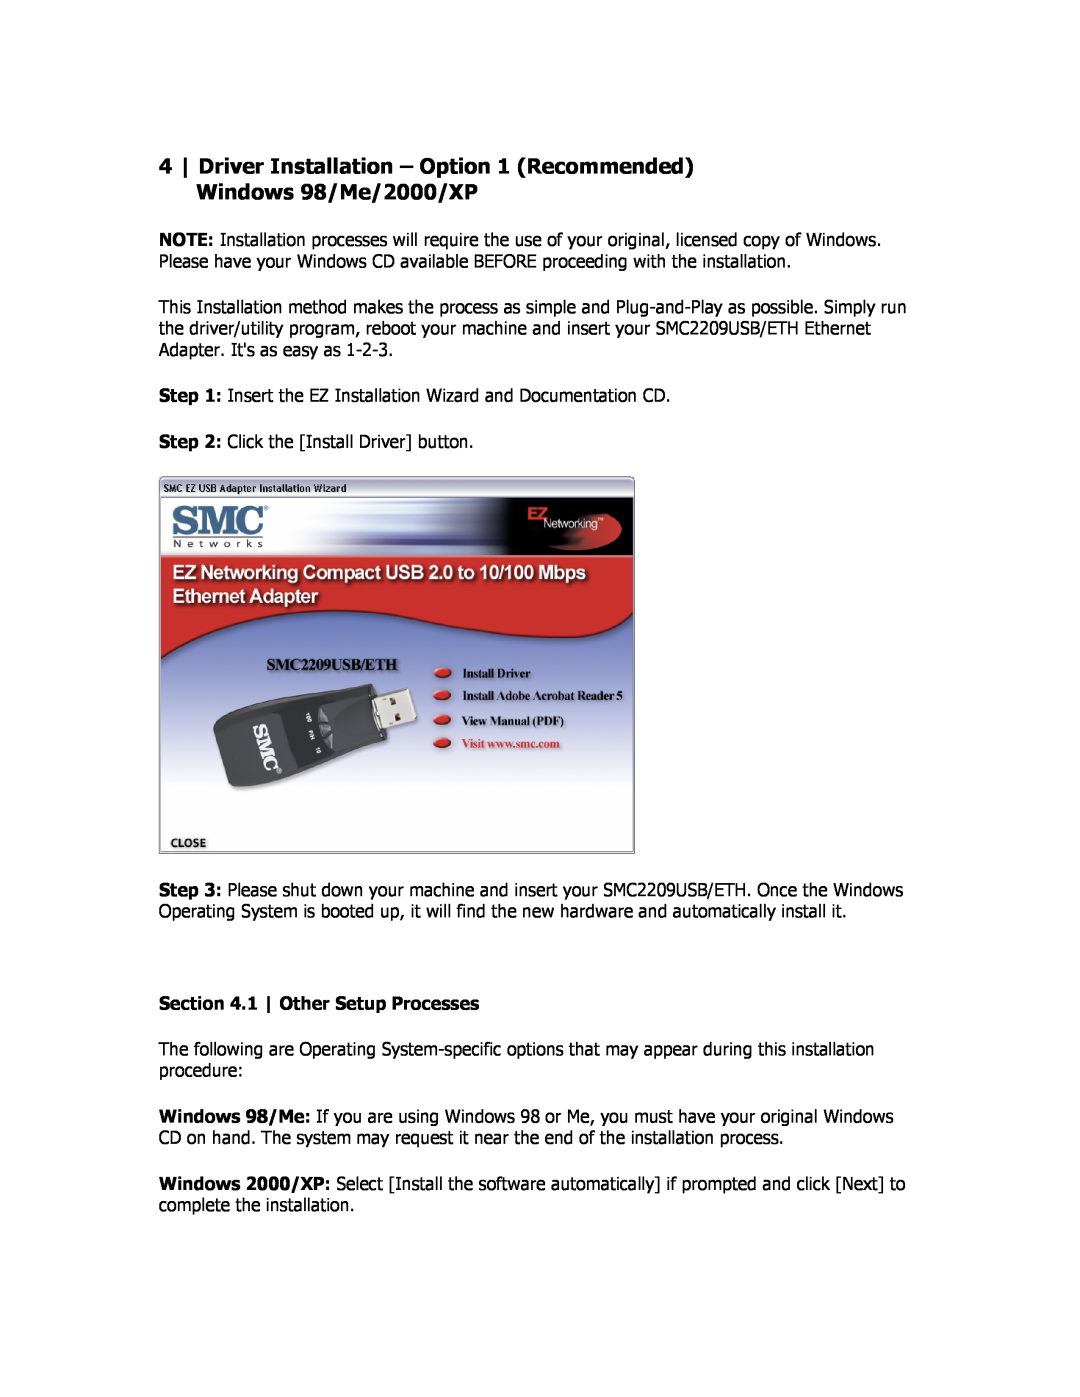 SMC Networks SMC2209USB/ETH Driver Installation - Option 1 Recommended Windows 98/Me/2000/XP, 1 Other Setup Processes 